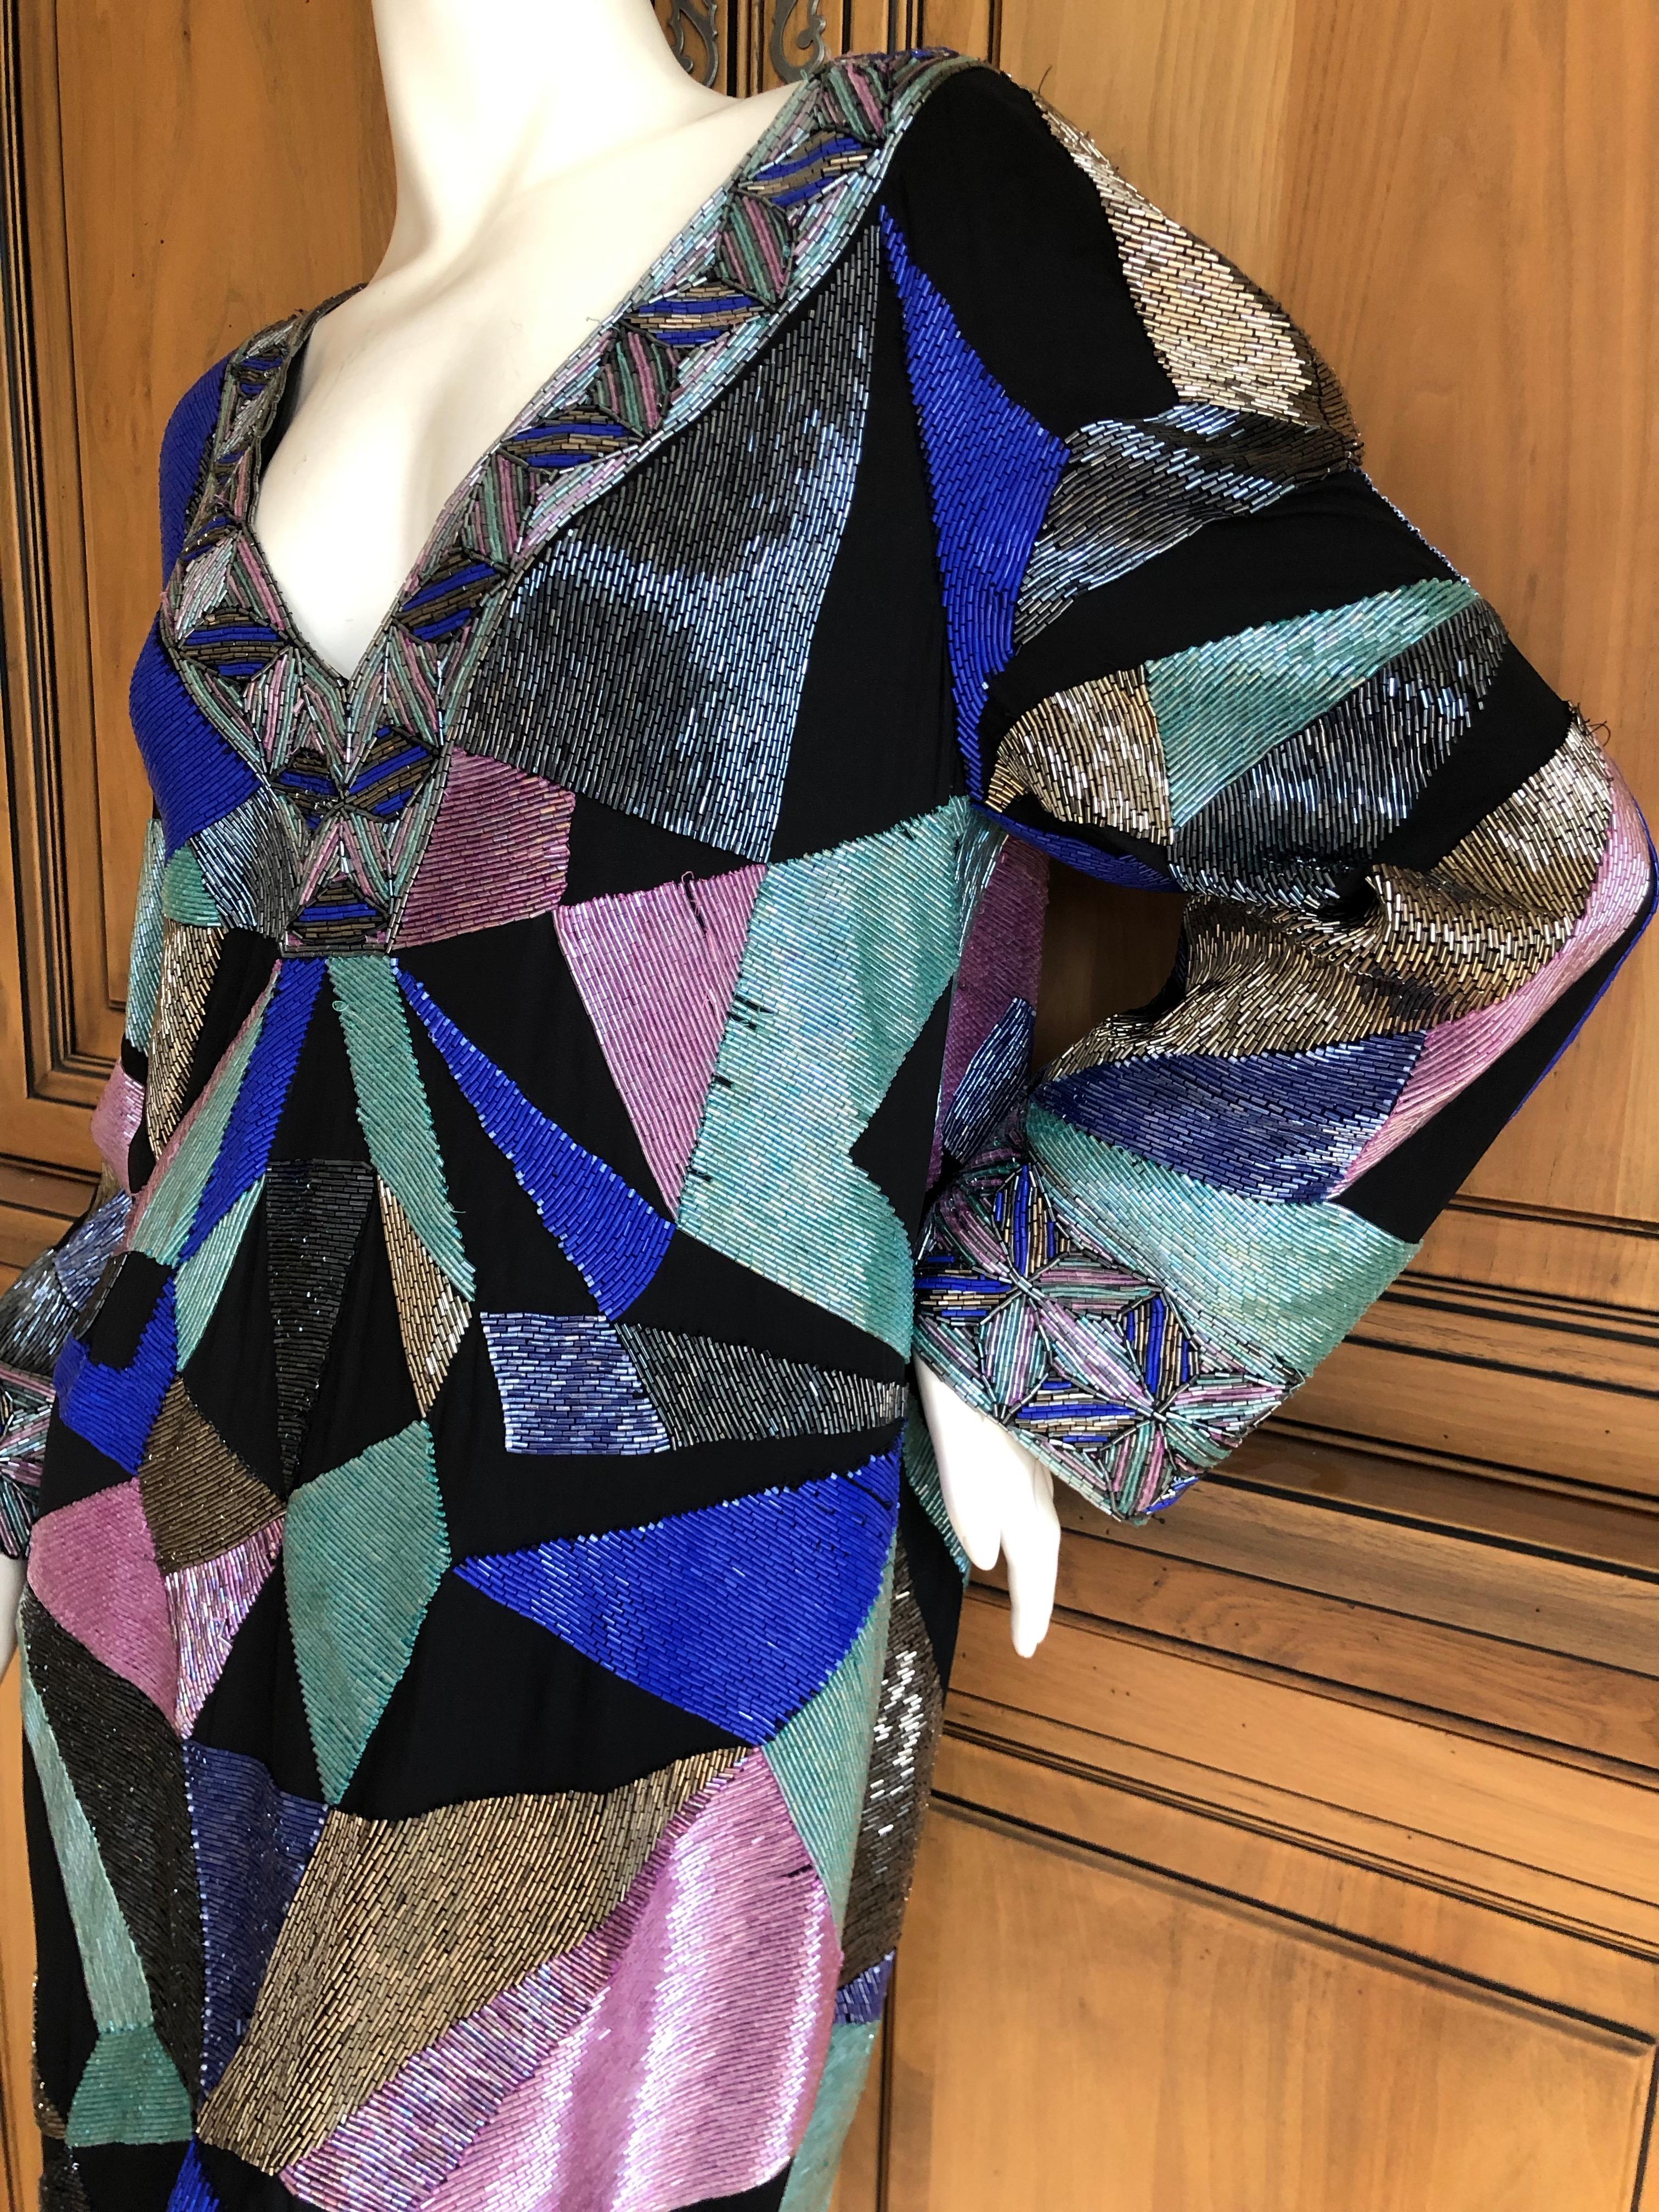 Emilio Pucci Geometric Glass Bugle Bead Embellished Cocktail Dress NWT $7260 42 In New Condition For Sale In Cloverdale, CA